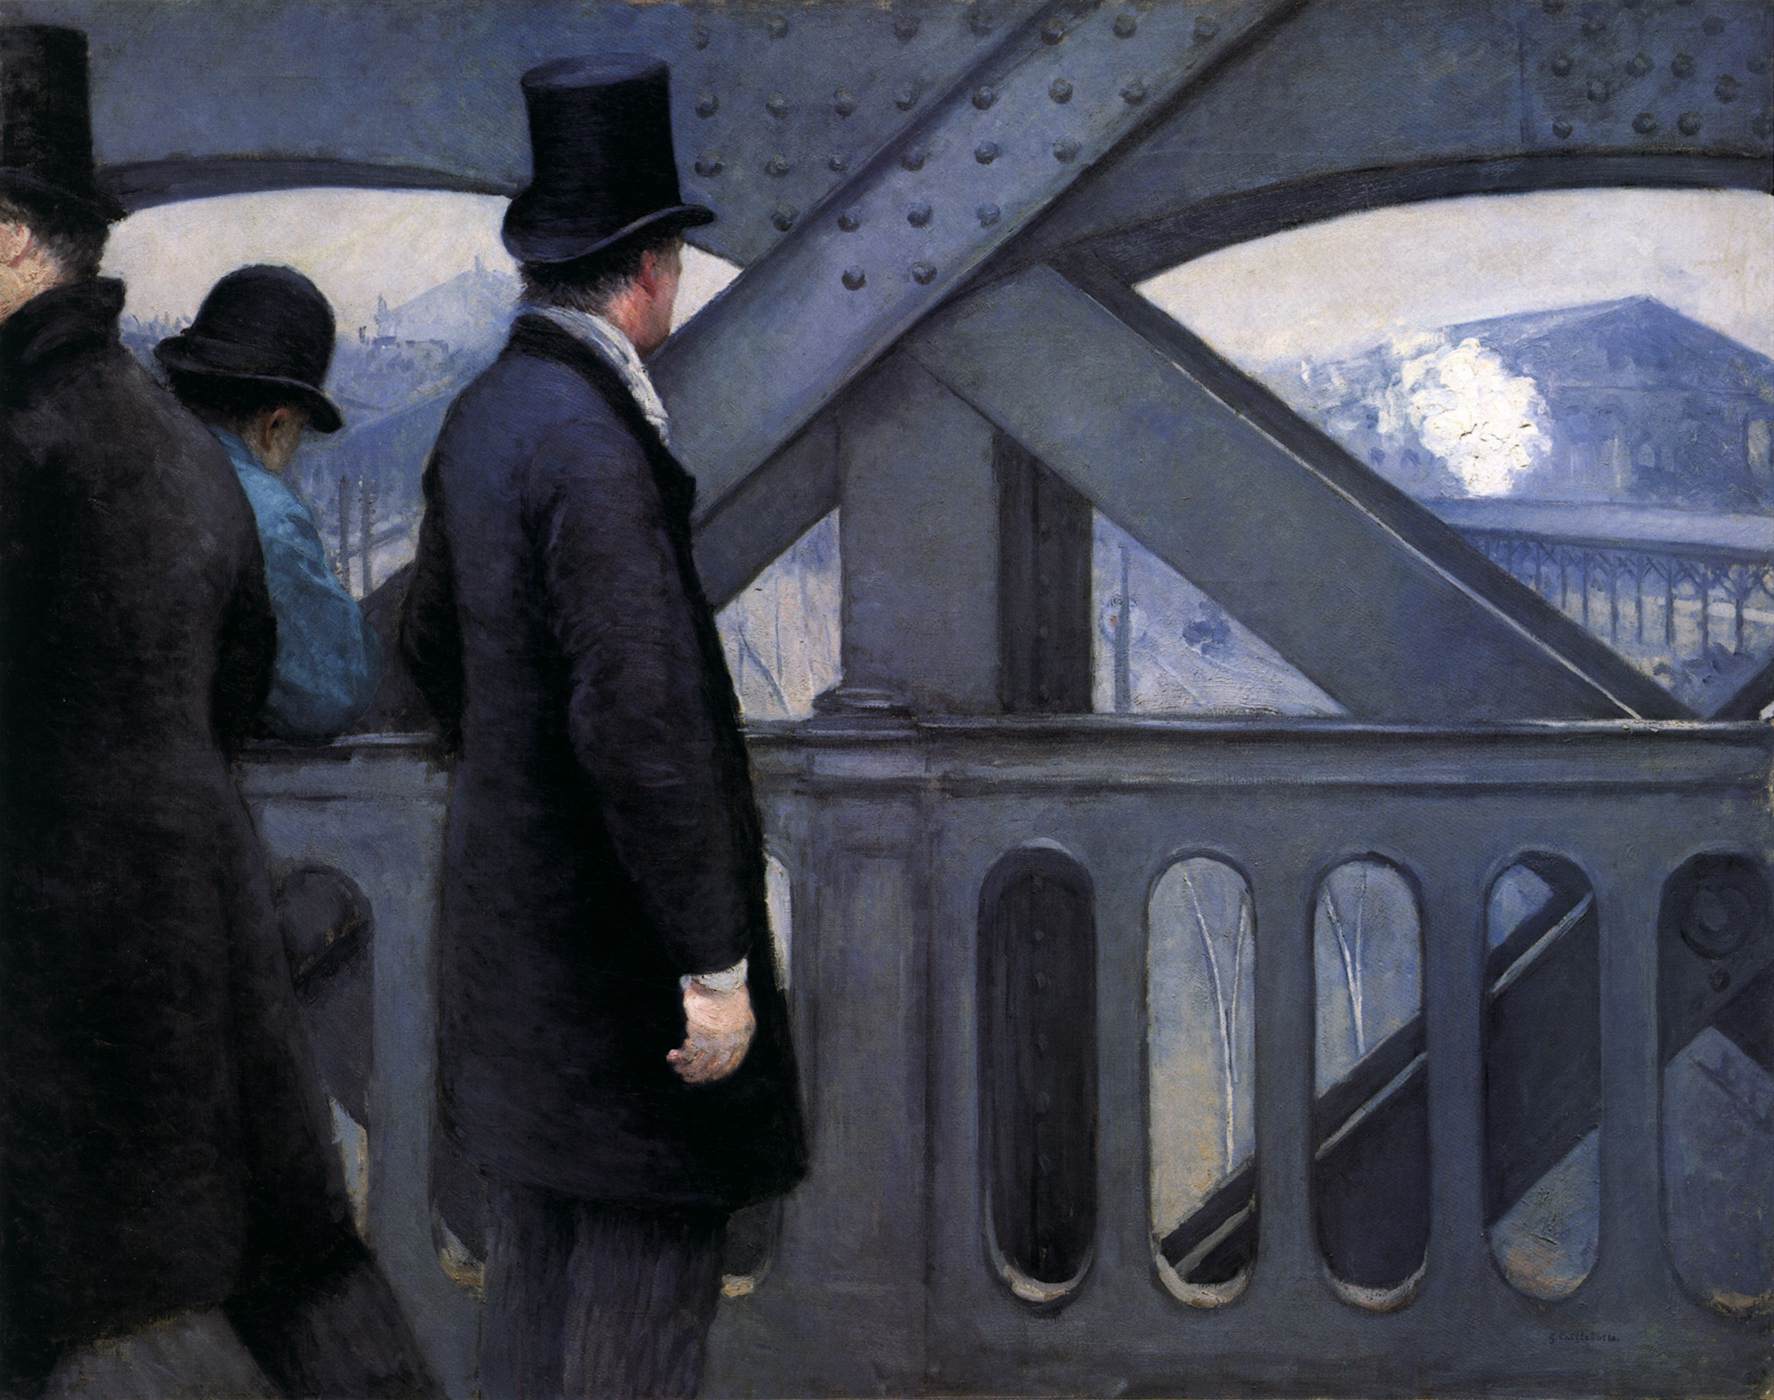 Sul Pont de l’Europe by Gustave Caillebotte - 1876-77 - 105,7 x 130,8 cm Kimbell Art Museum